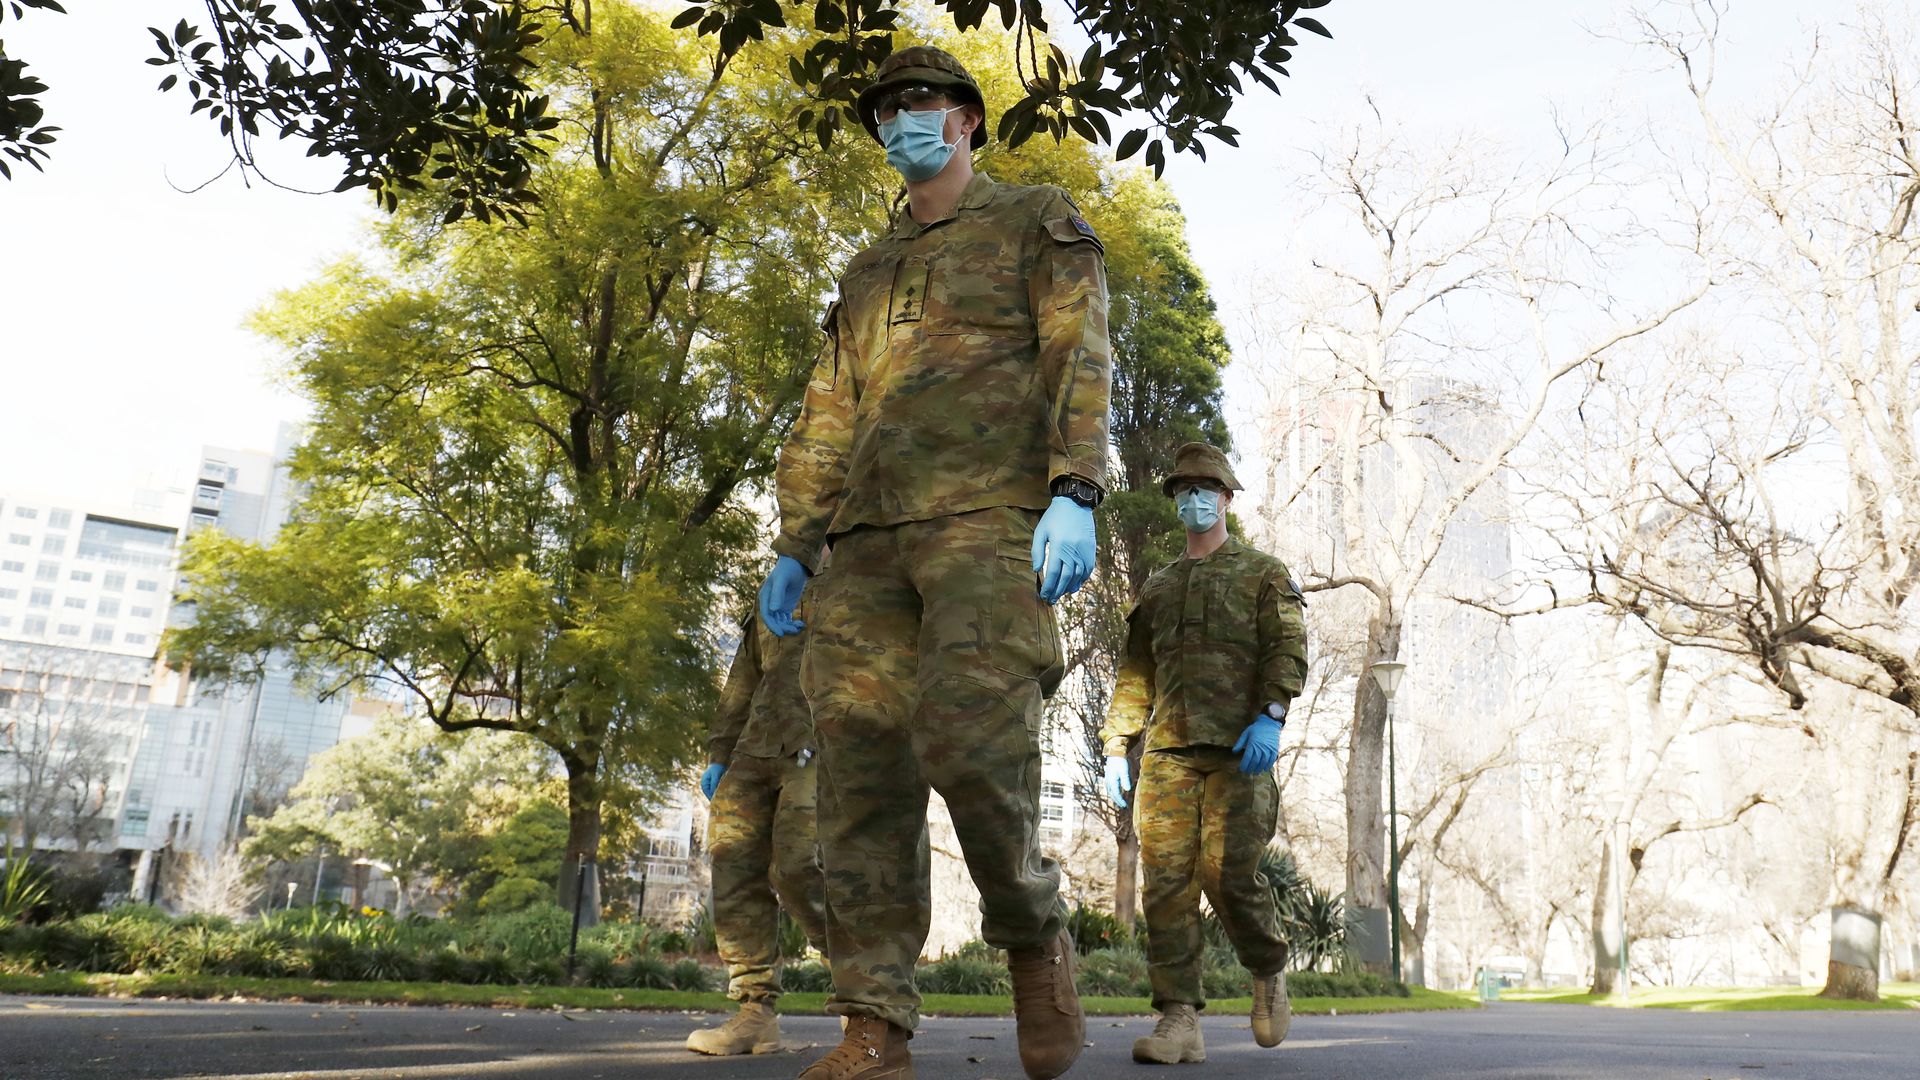 Members of the Australian Defence Force patrol the streets on August 03, 2020 in Melbourne, Australia. Melbourne 